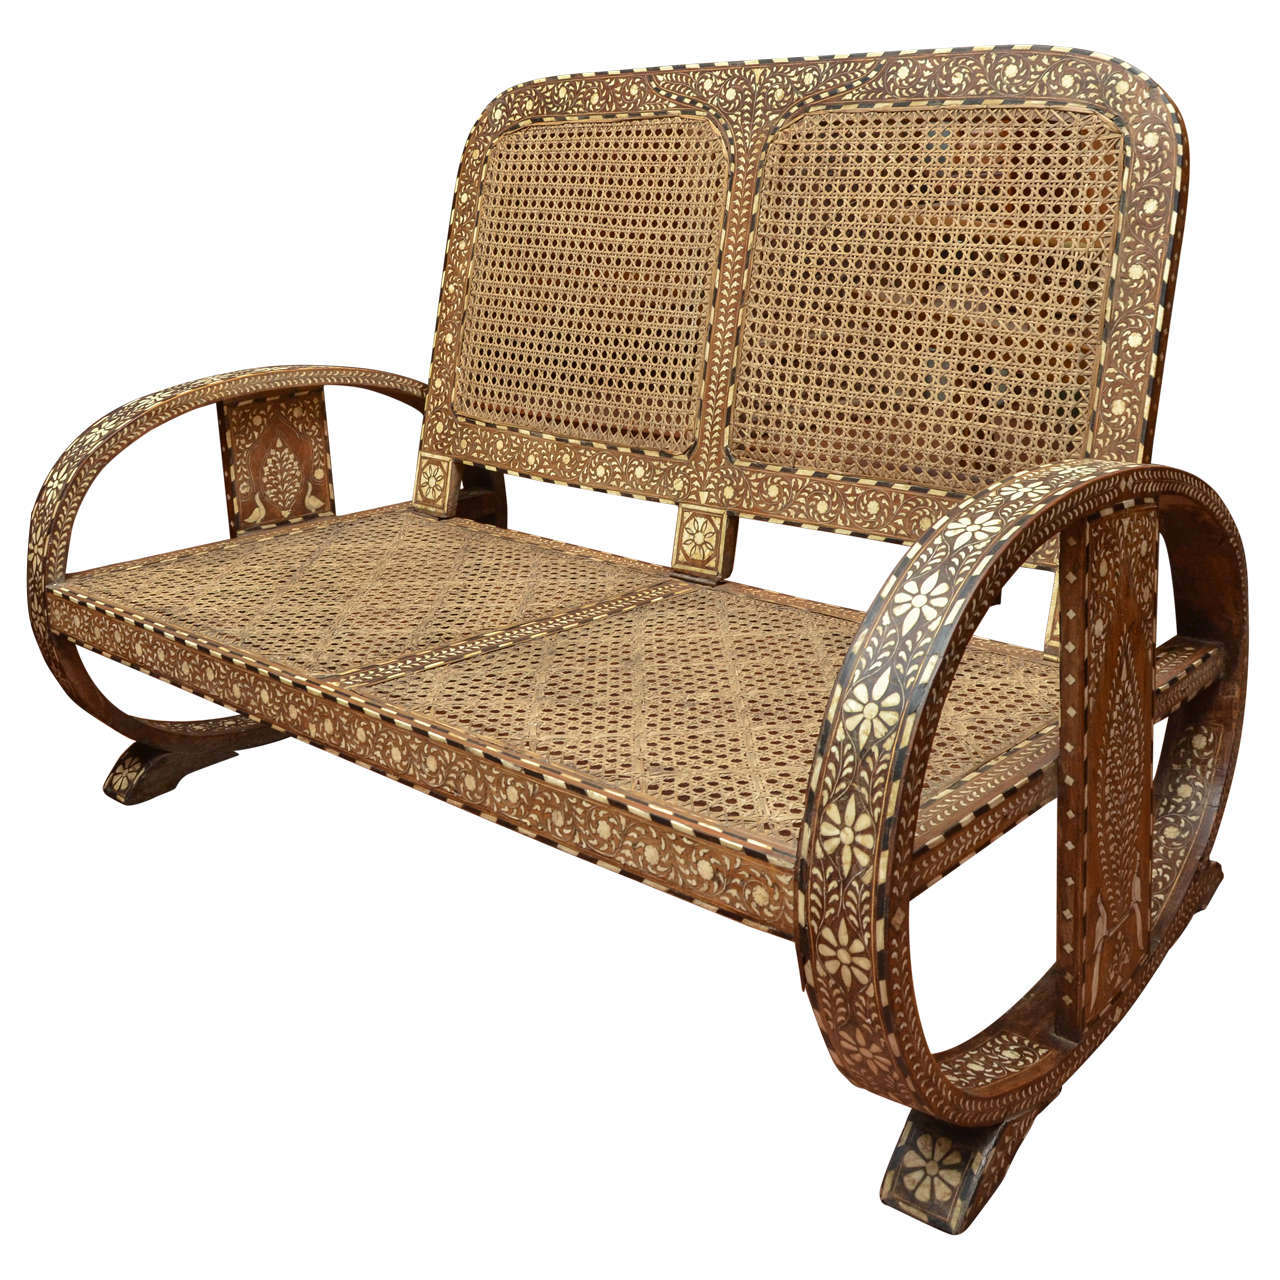 Anglo-Indian Horn and Bone Inlaid Settee with Caned Back and Seat